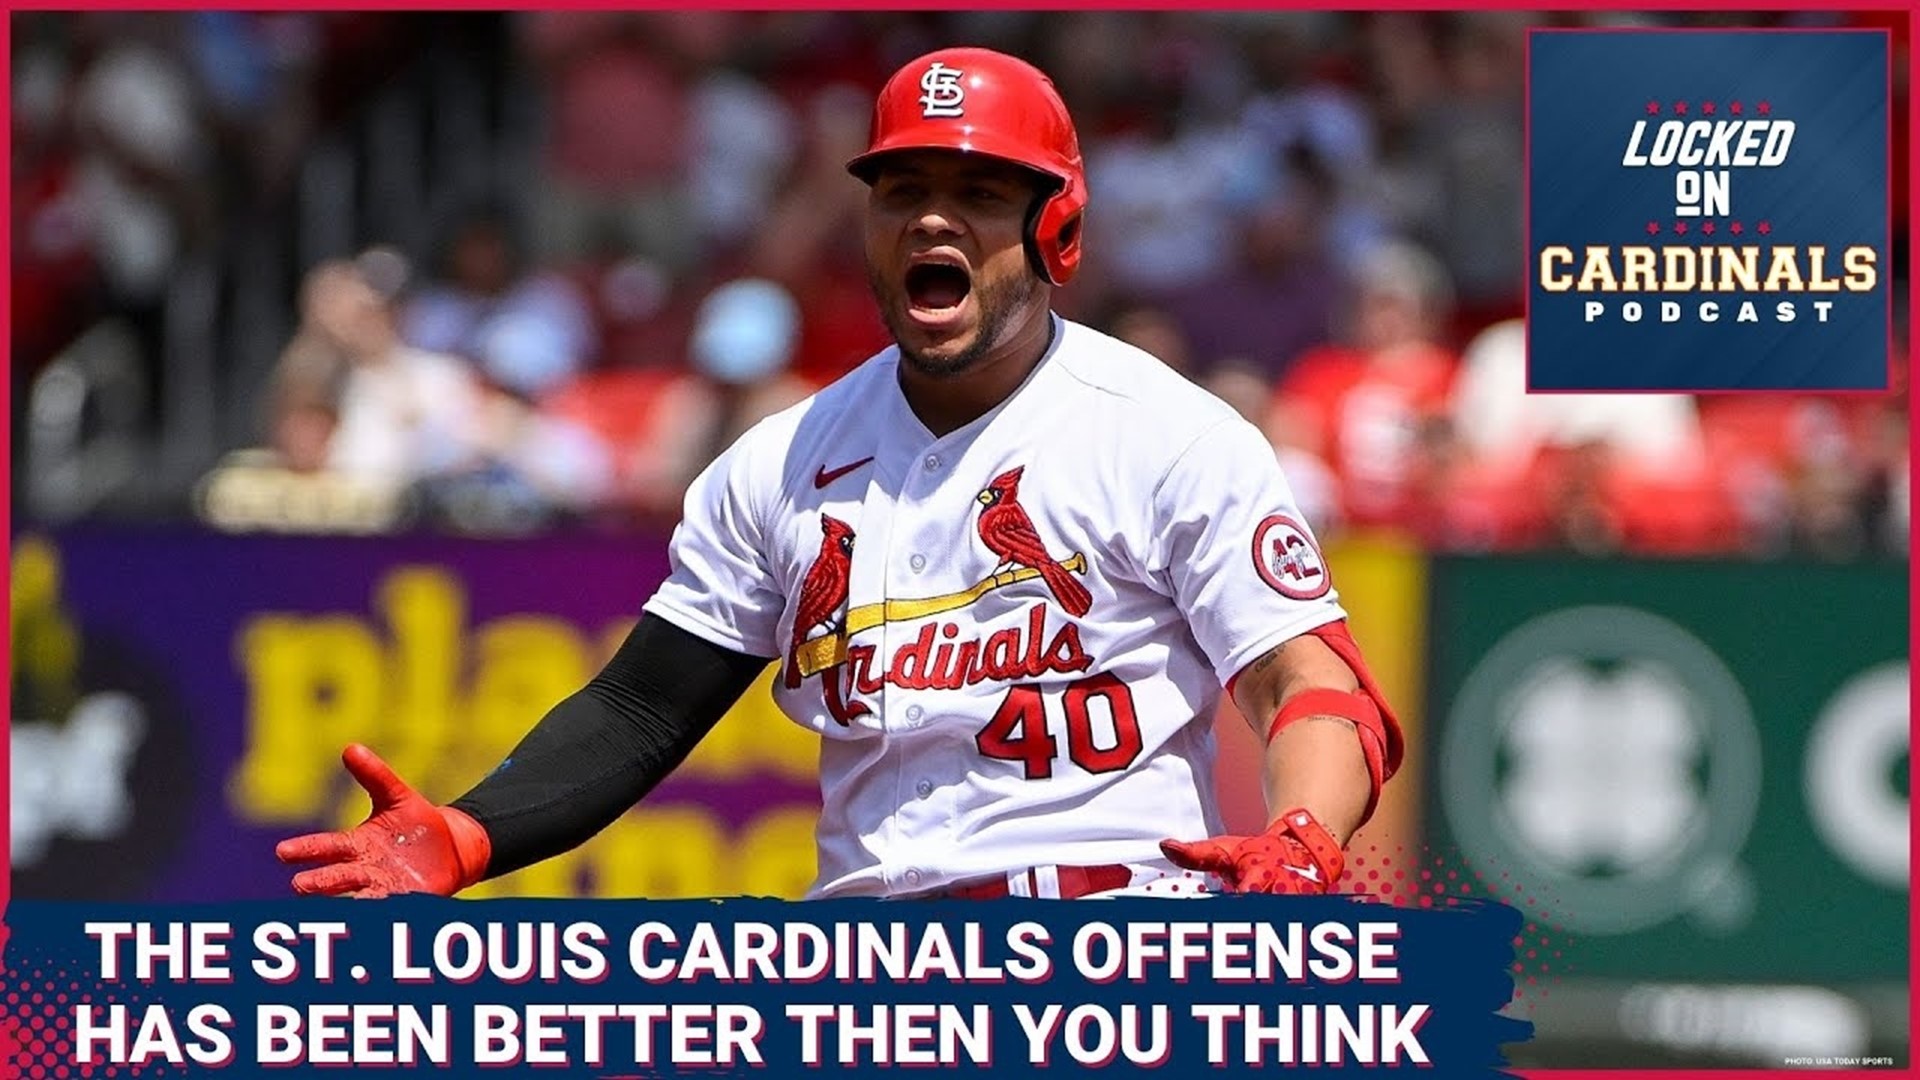 The Cardinals have had a rough start but theyre better than you think Locked On Cardinals ksdk